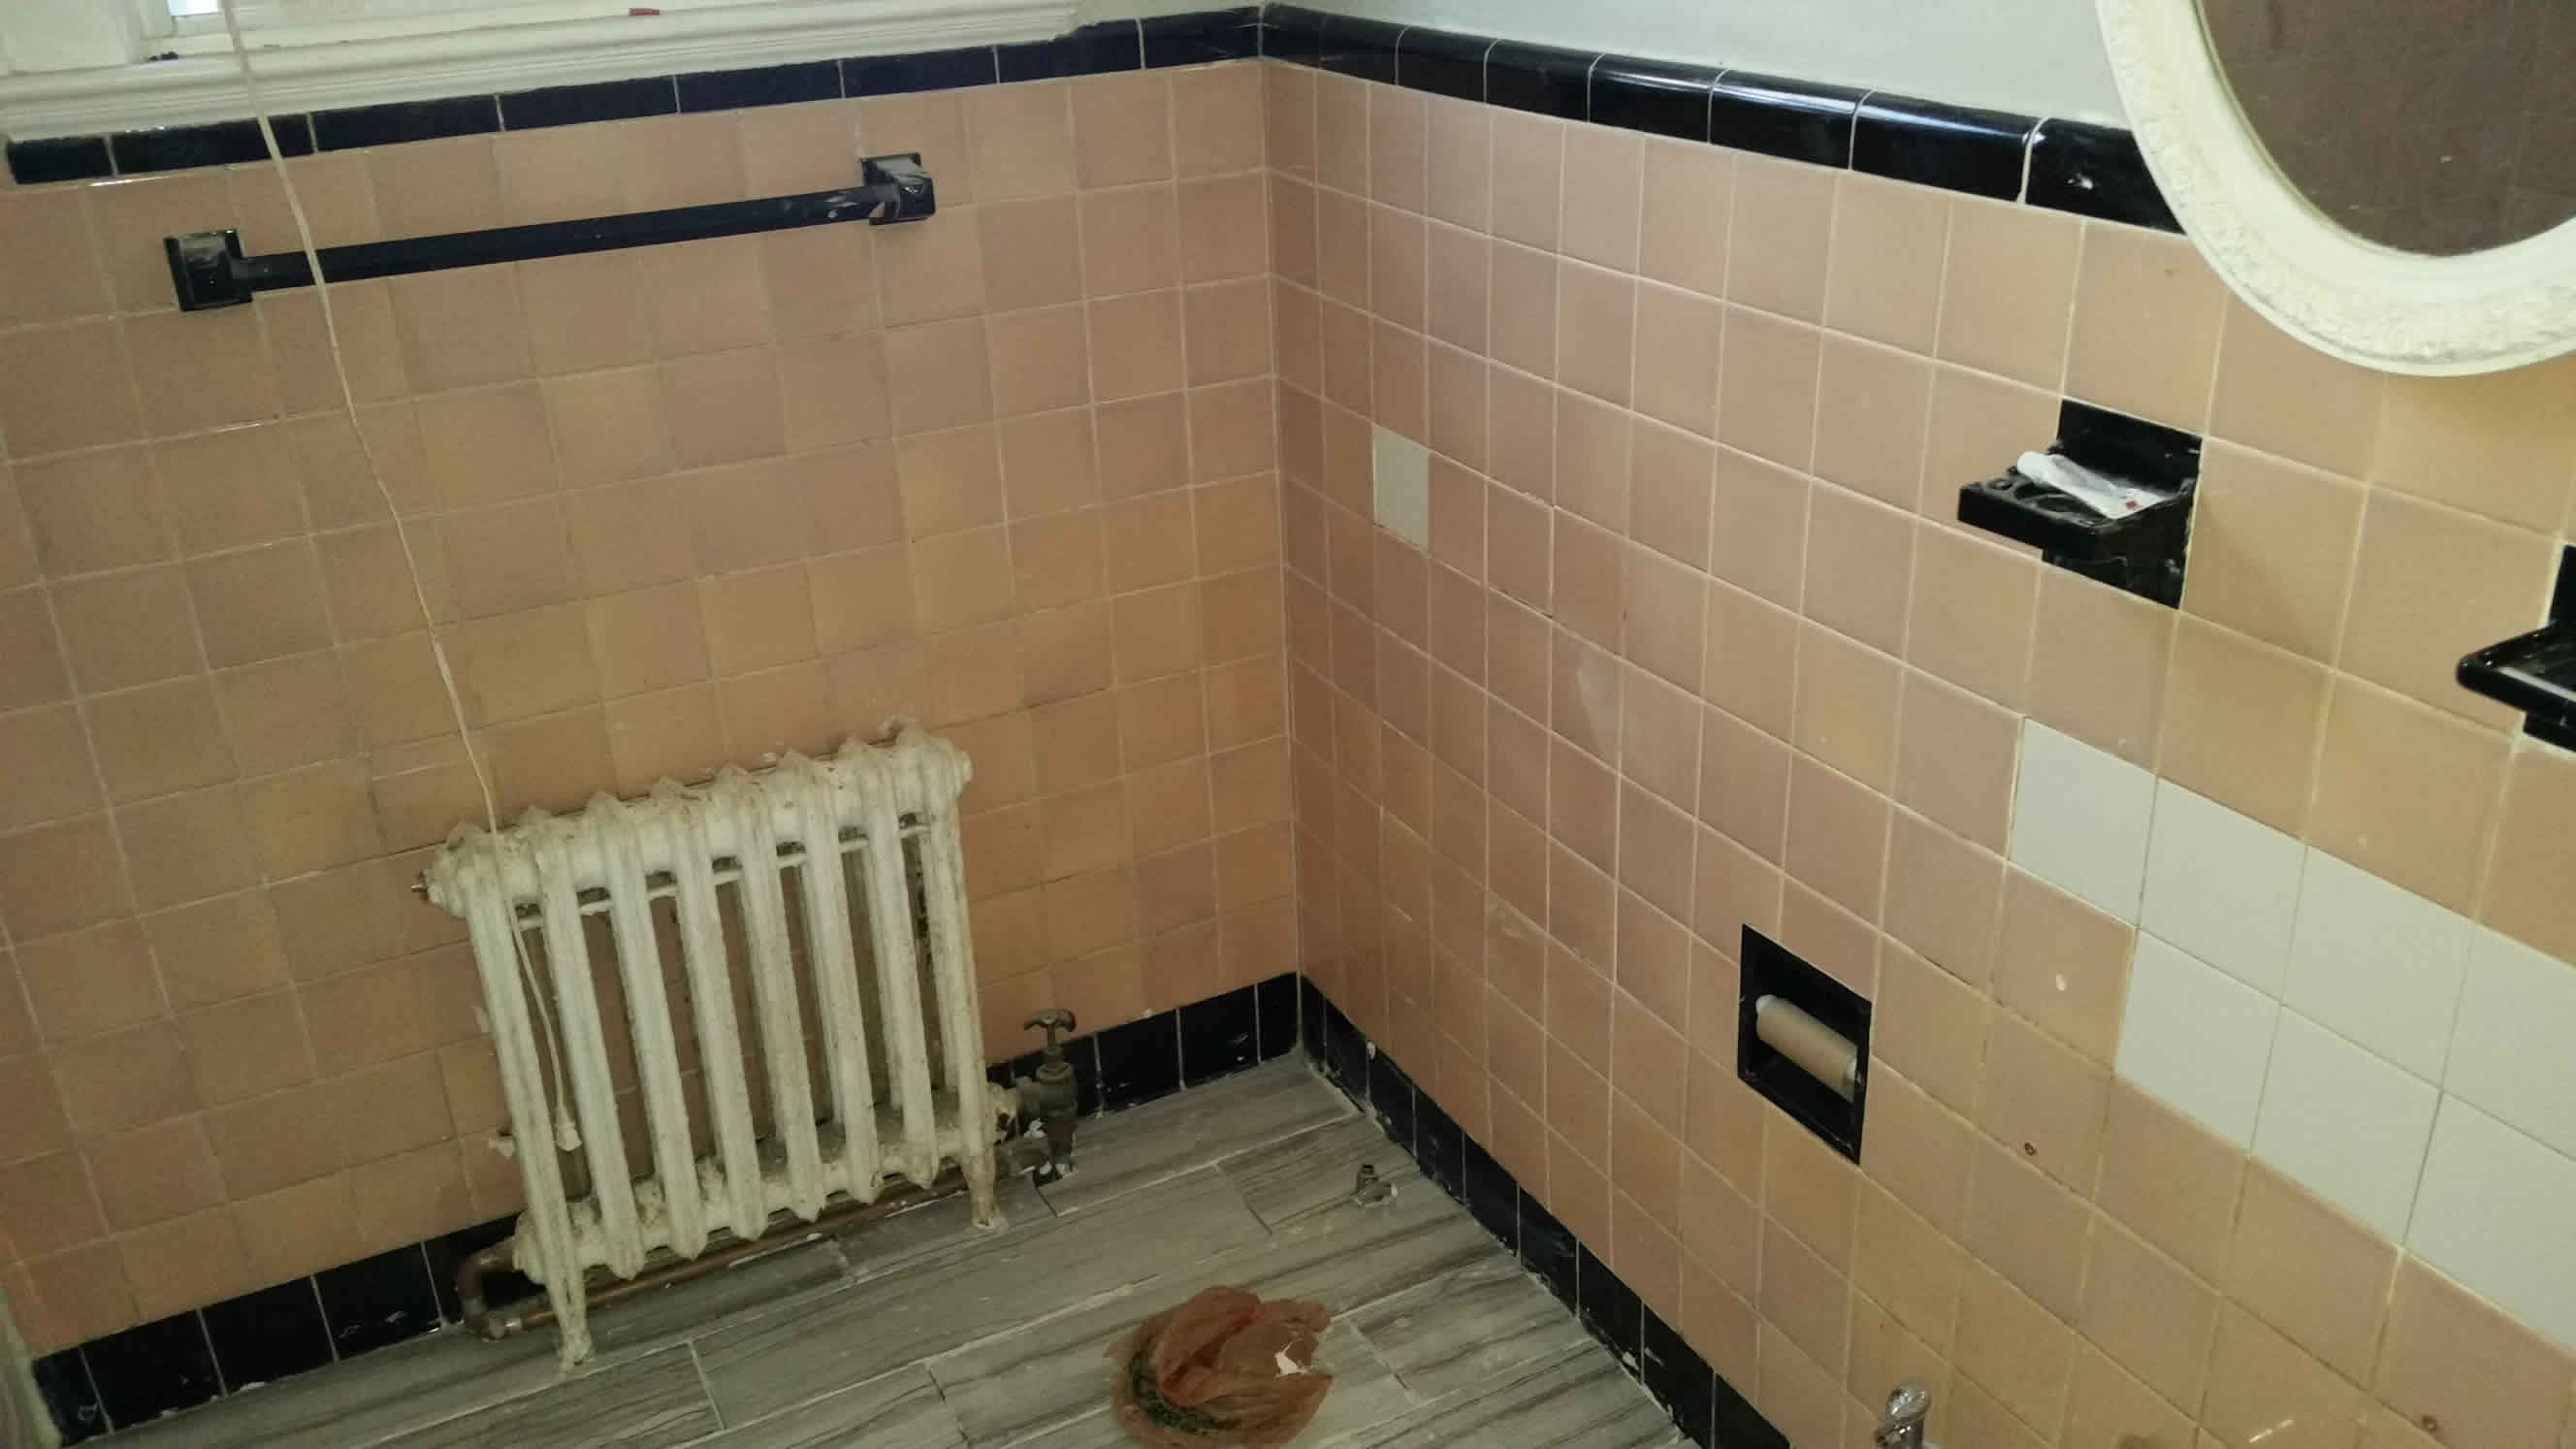 Old bathroom walls with mismatched tiles?